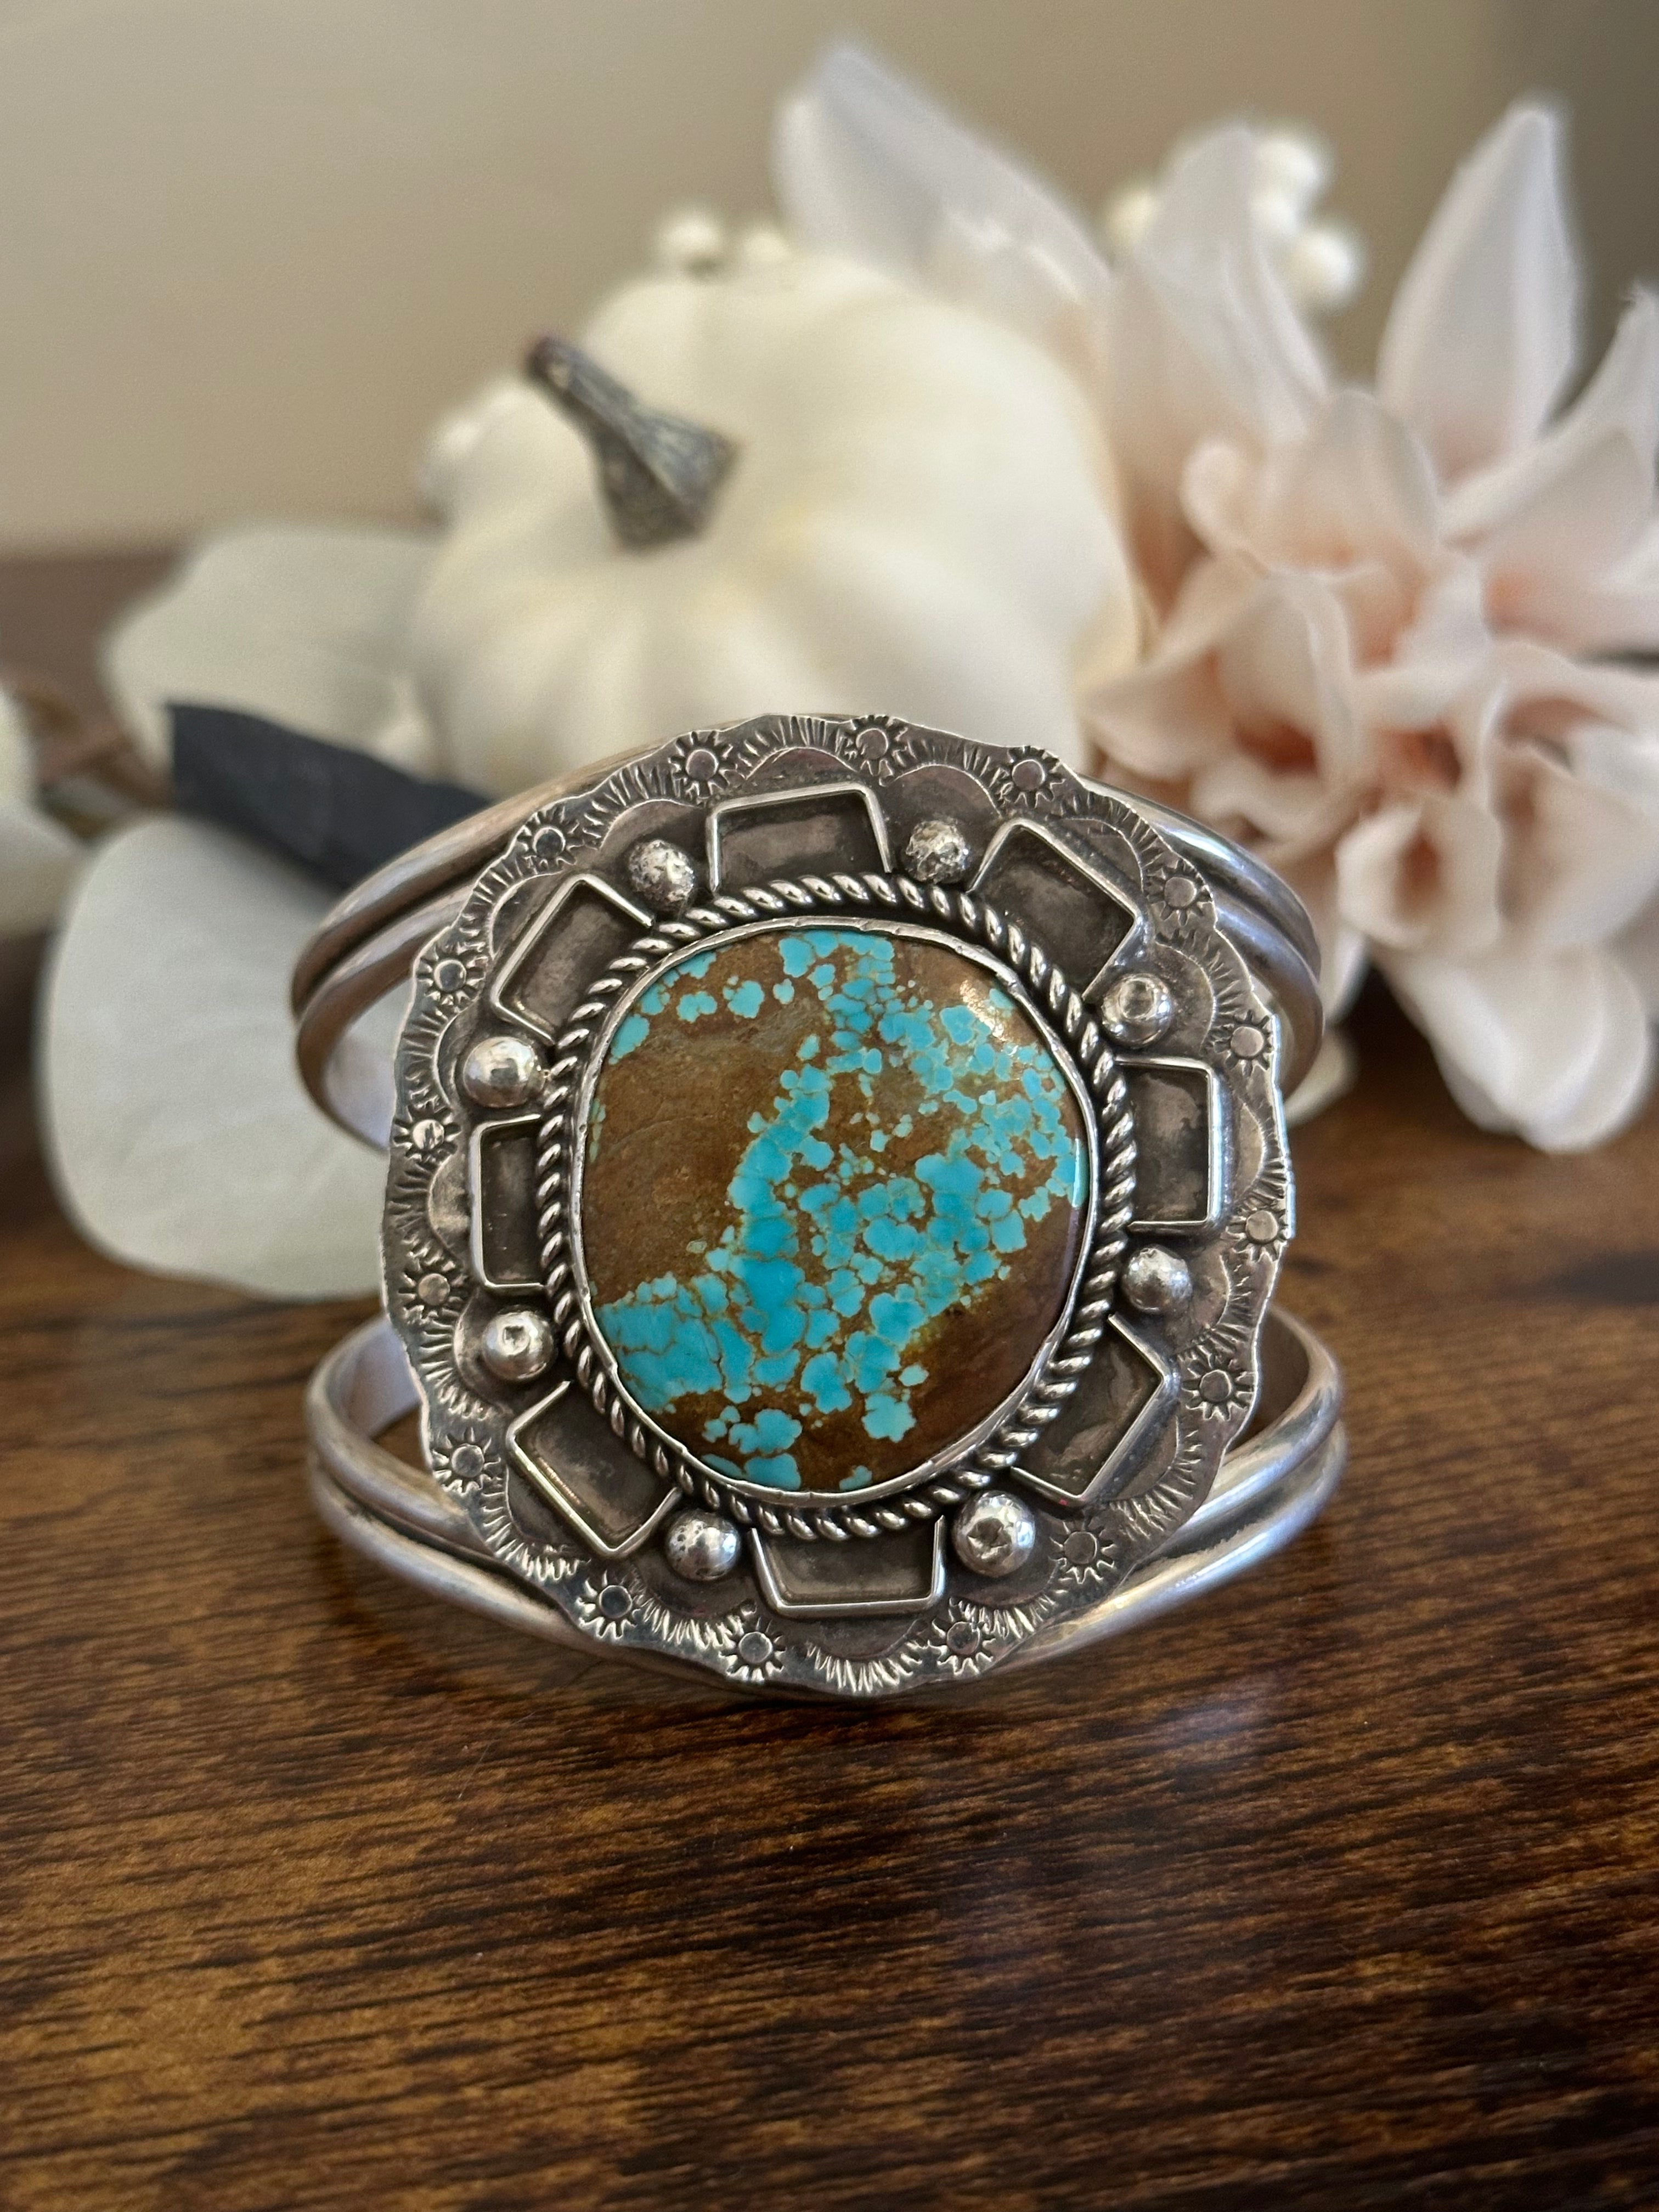 Rena Shelly #8 Turquoise & Sterling Silver Cuff Bracelet